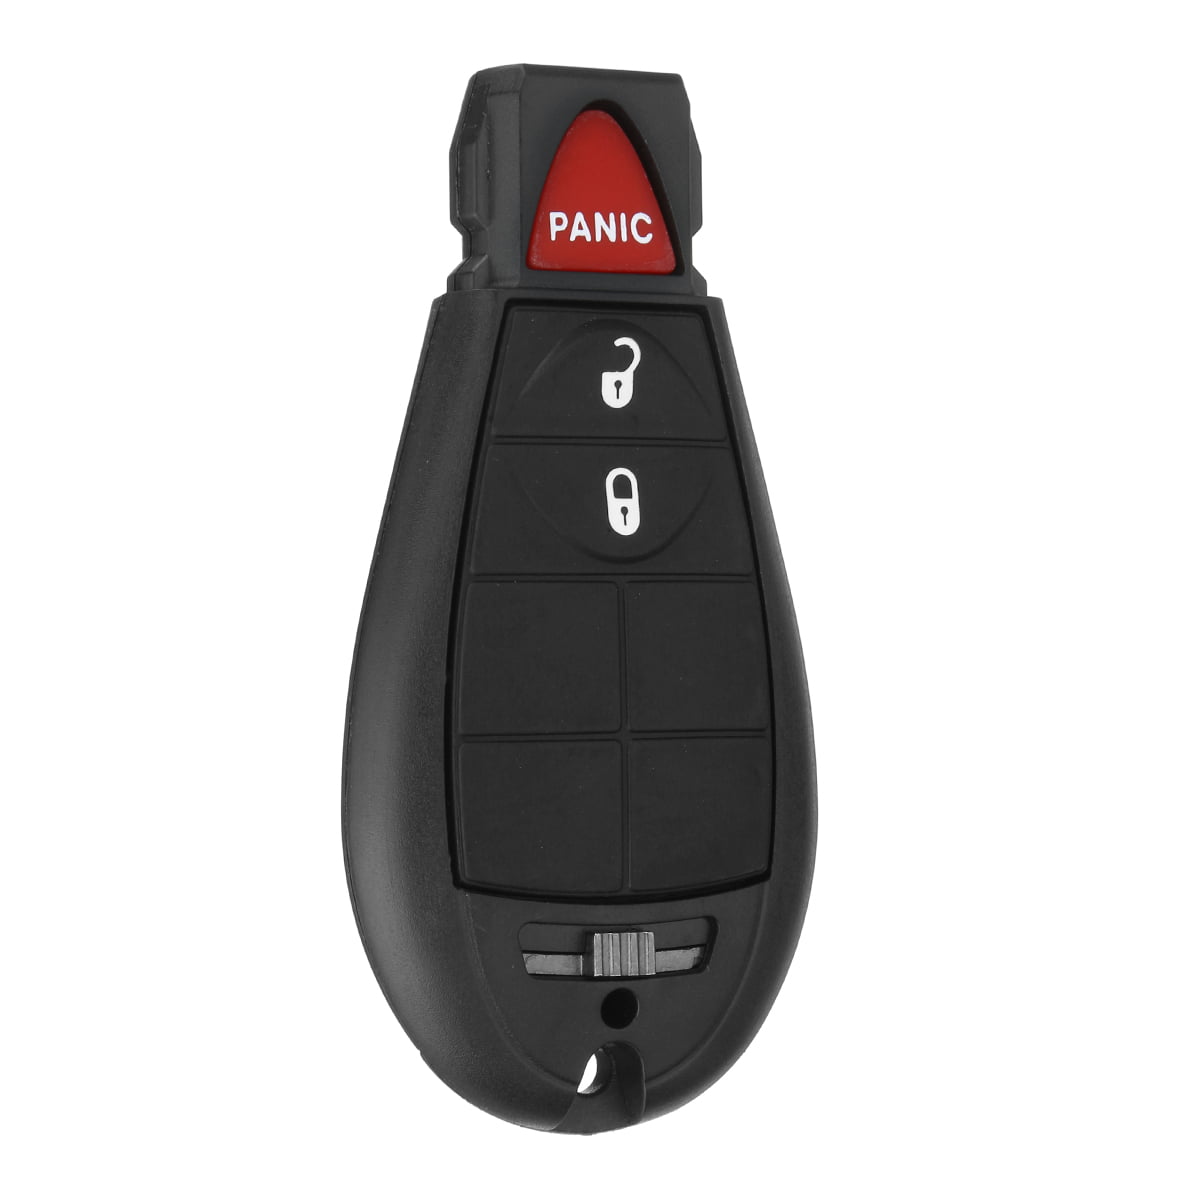 Car Keyless Remote Key Fob 3 Buttons for Dodge 08-14 Grand Caravan 09-13 Journey